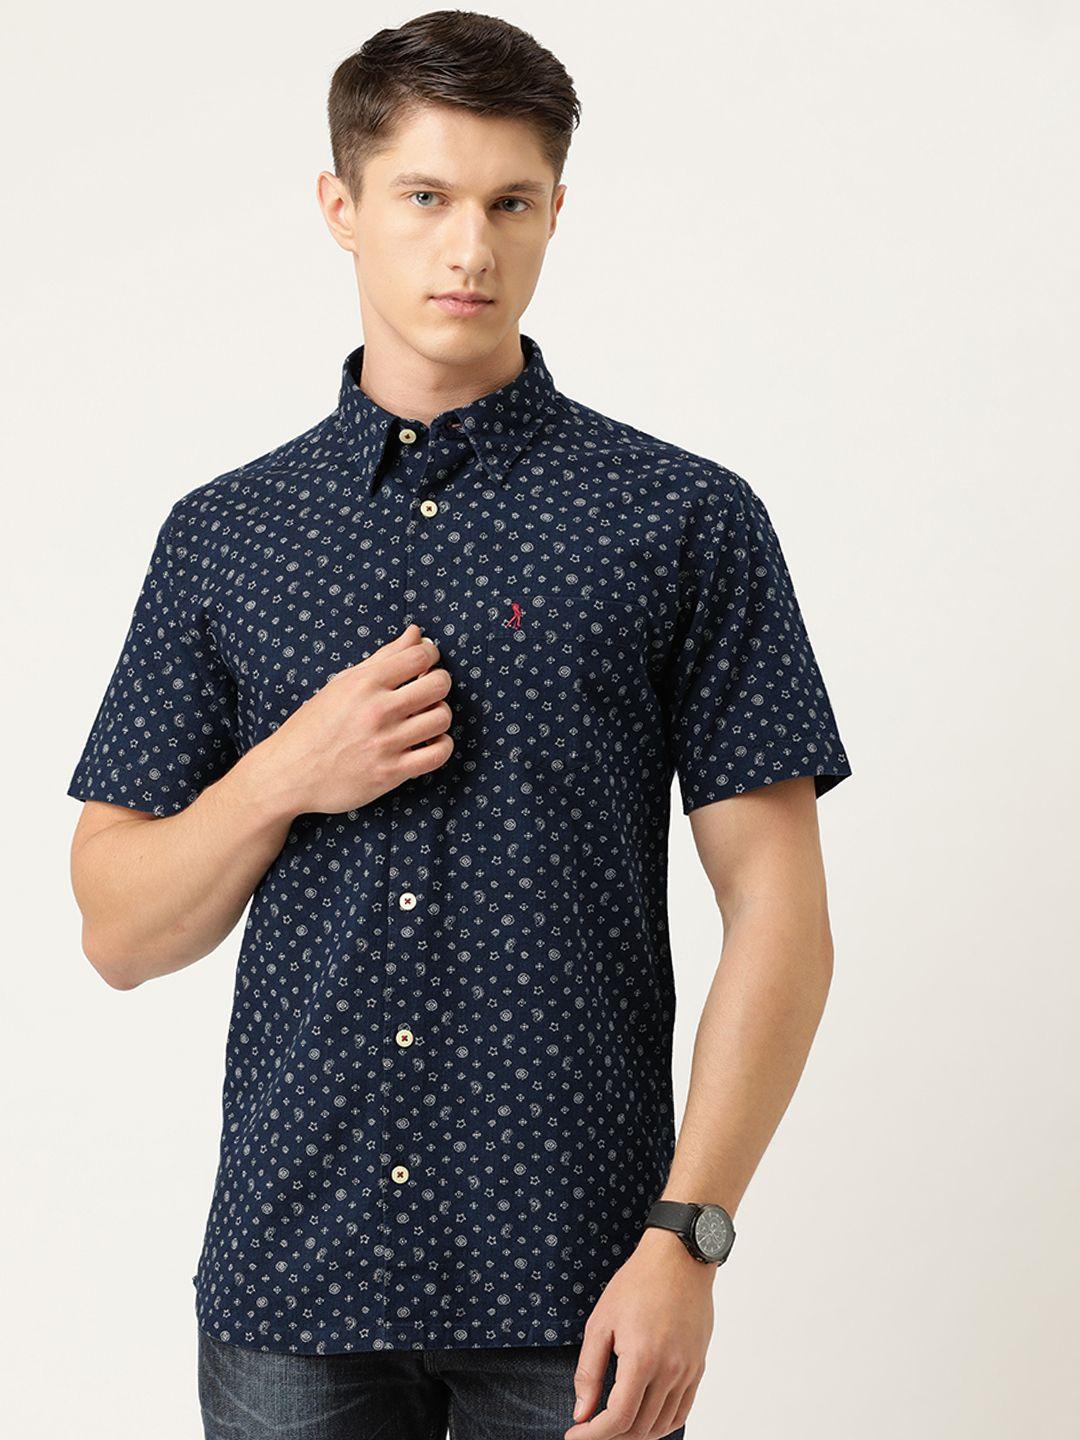 burnt umber men navy blue & white stars & floral print slim fit pure cotton casual shirt